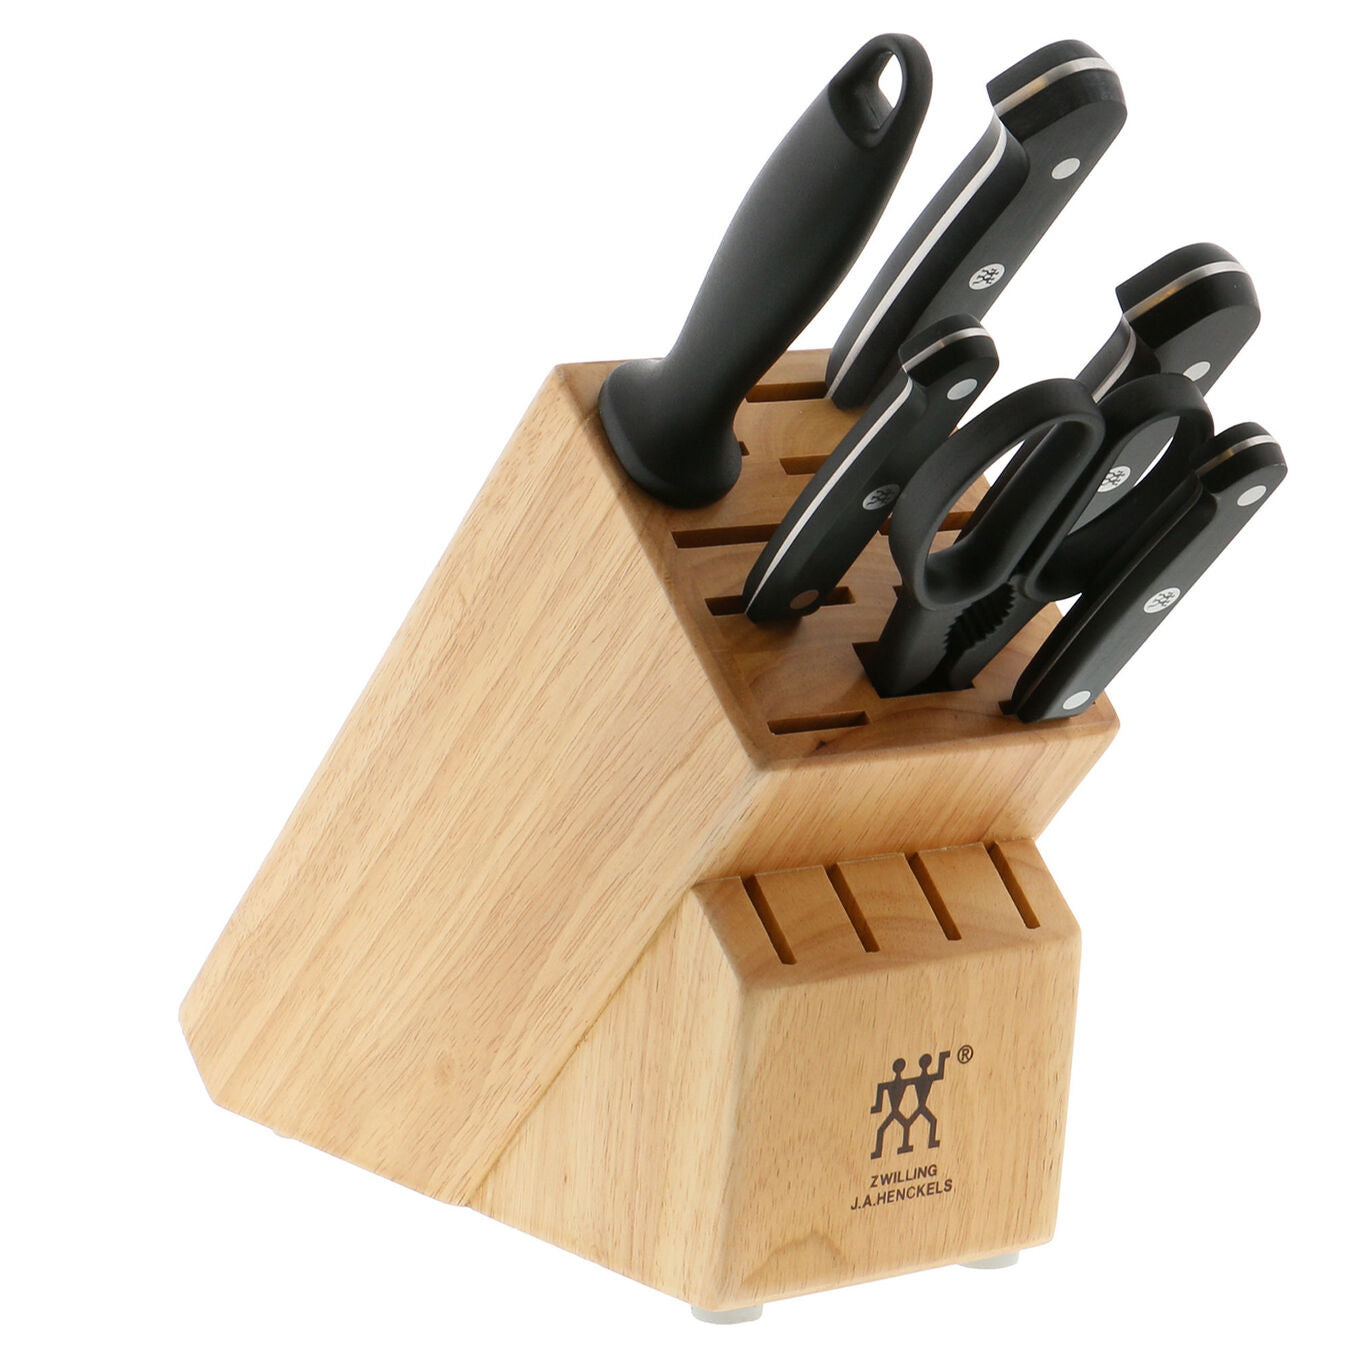 wooden knife block filled with knives on white background